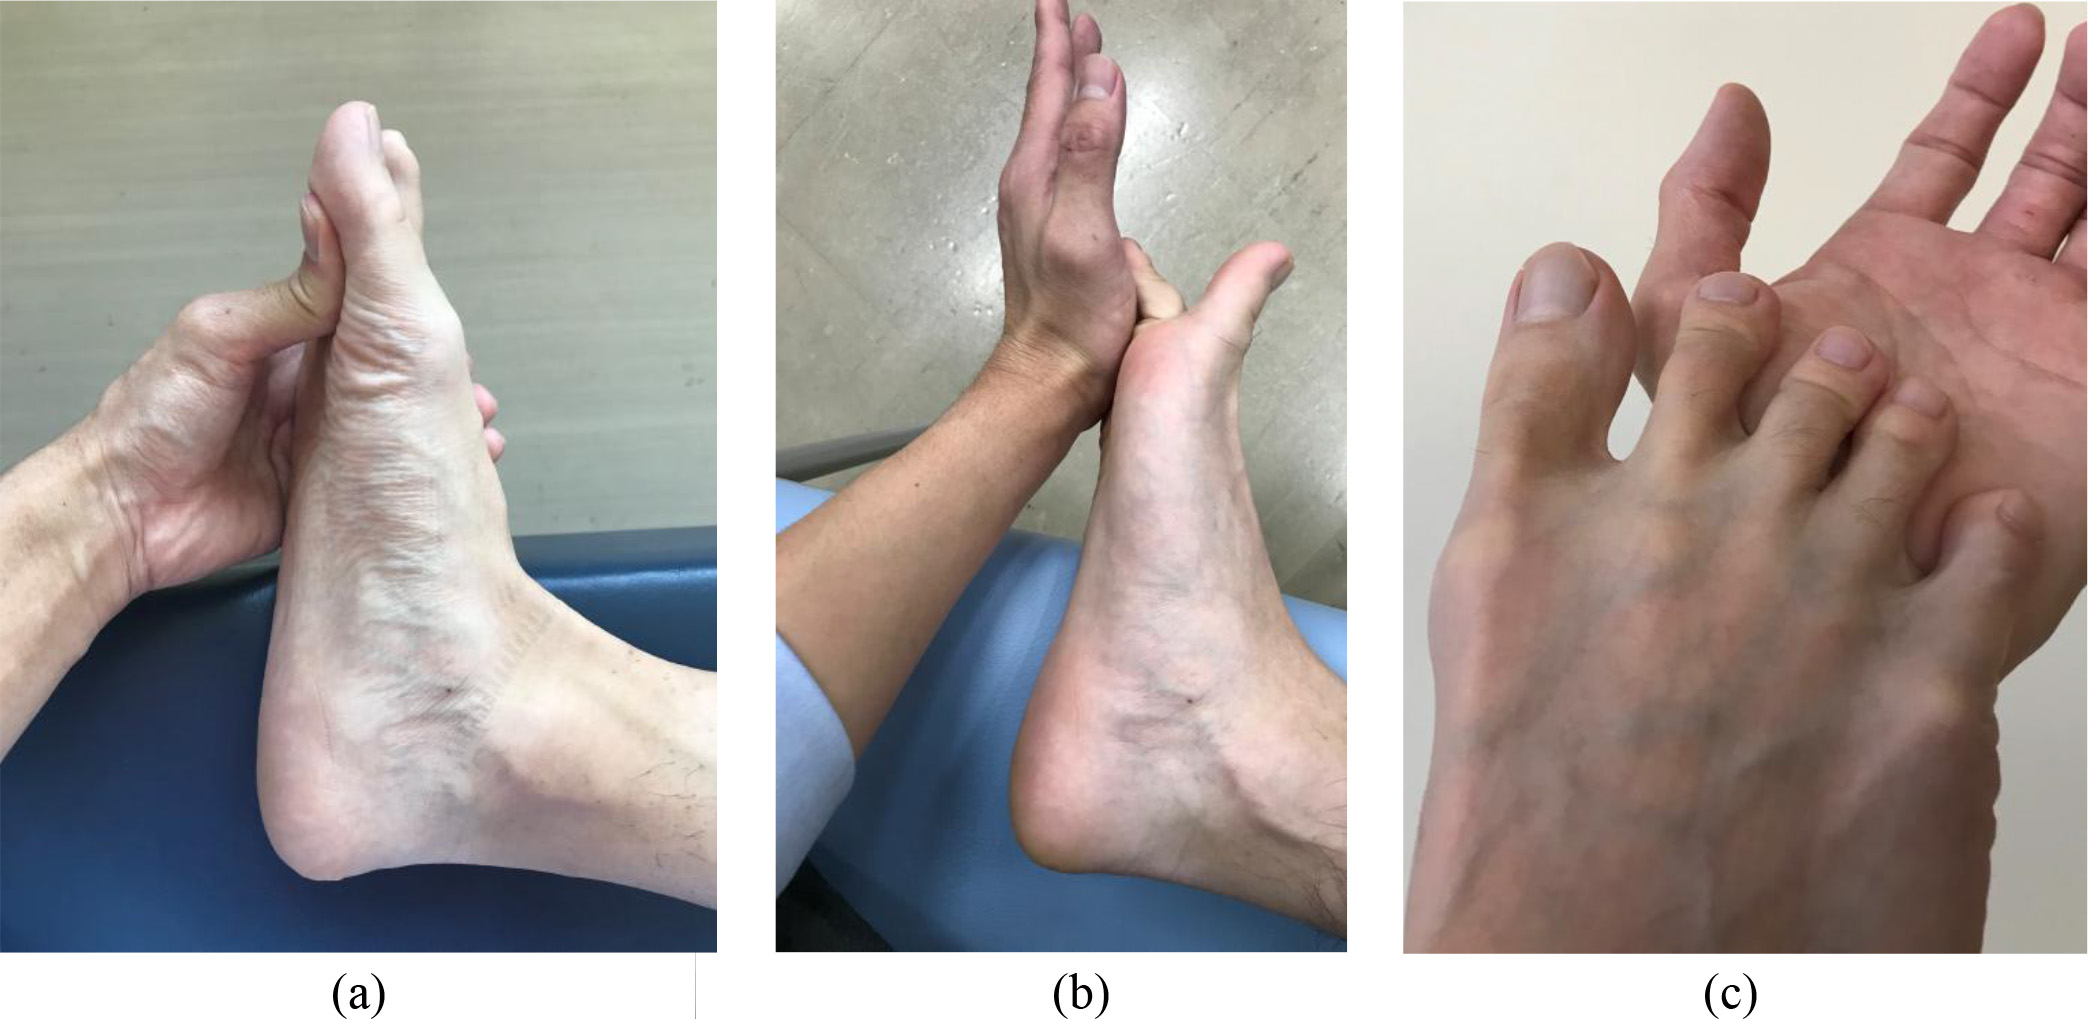 MTP flexion exercise. (a) exercise for the hallux, (b) and (c) exercise for the lesser toes. The participants were instructed to perform isometric MTP joint flexion without IP joint flexion.